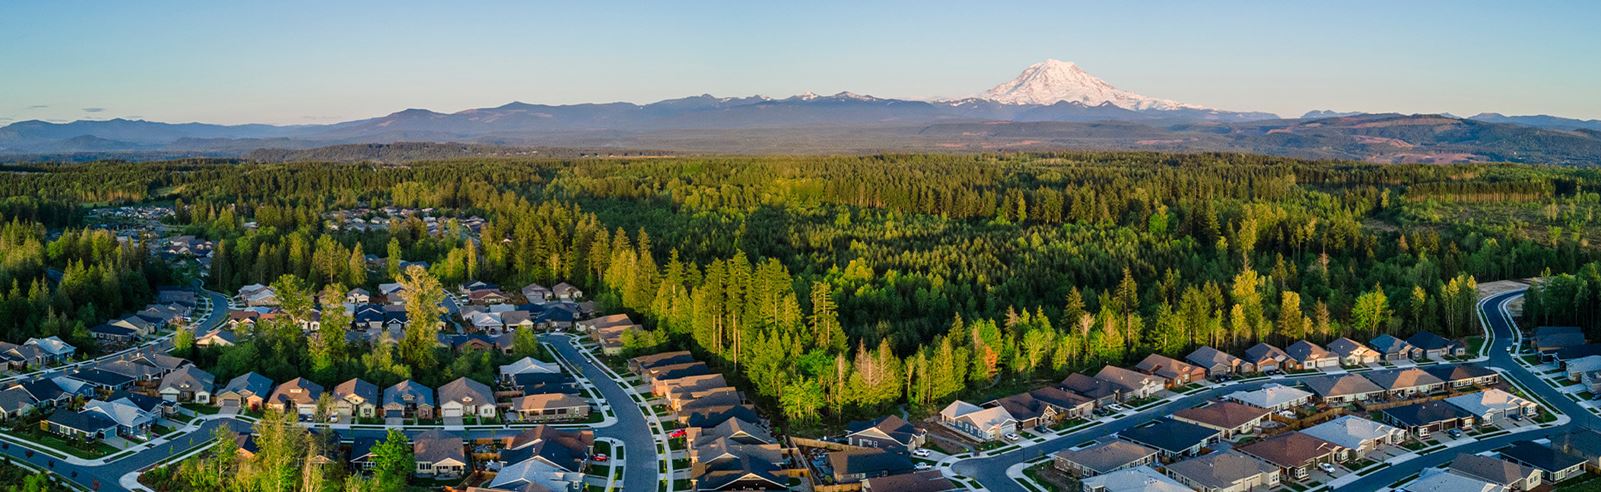 Bird's eye of Tehaleh with forest and Mount Rainier in background